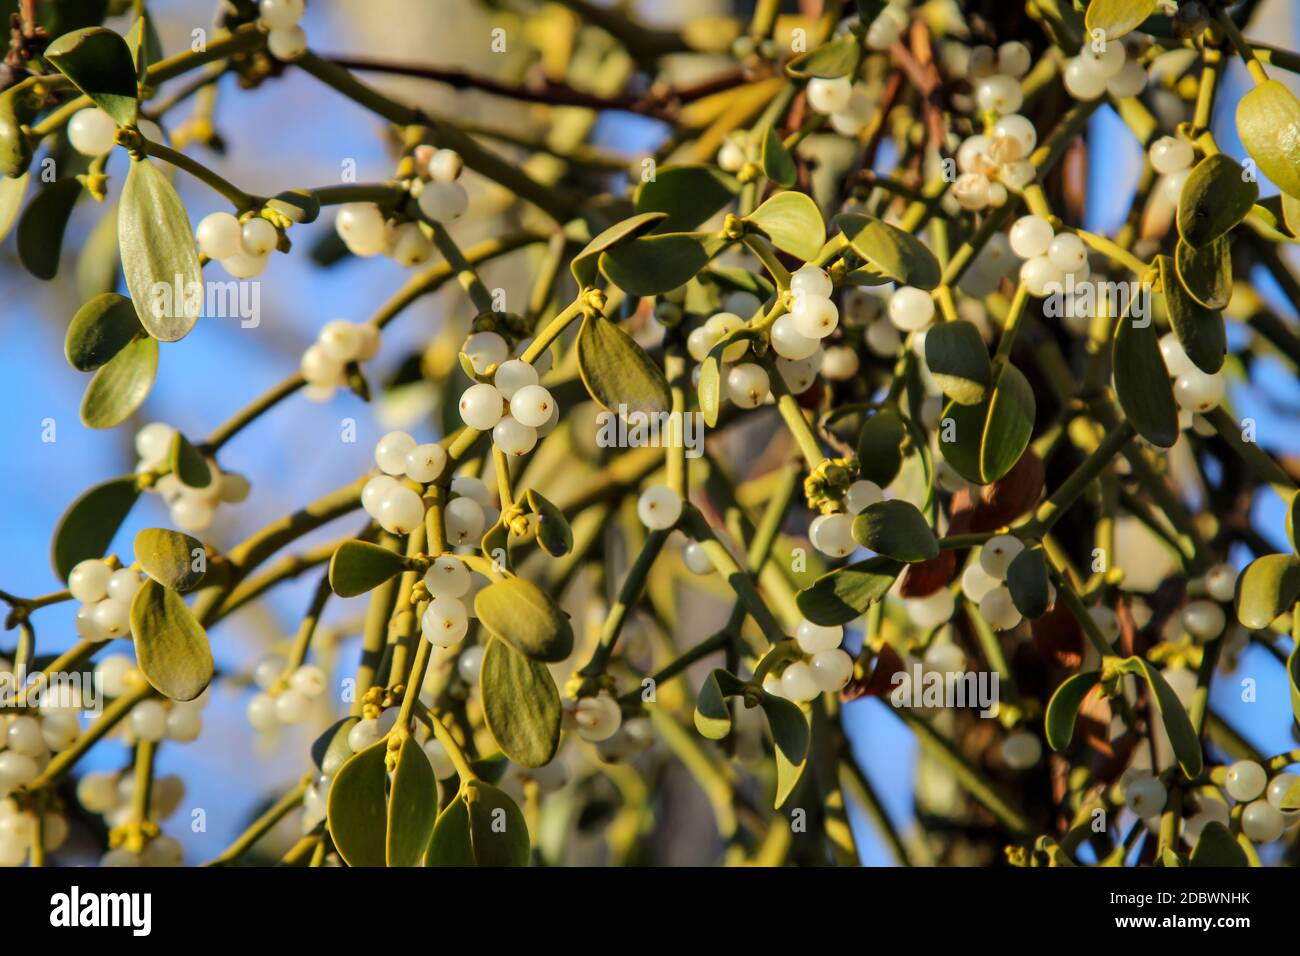 Close-up of a mistletoe in the tree. Mistletoes are parasite plants and live at the expense of the host. Stock Photo